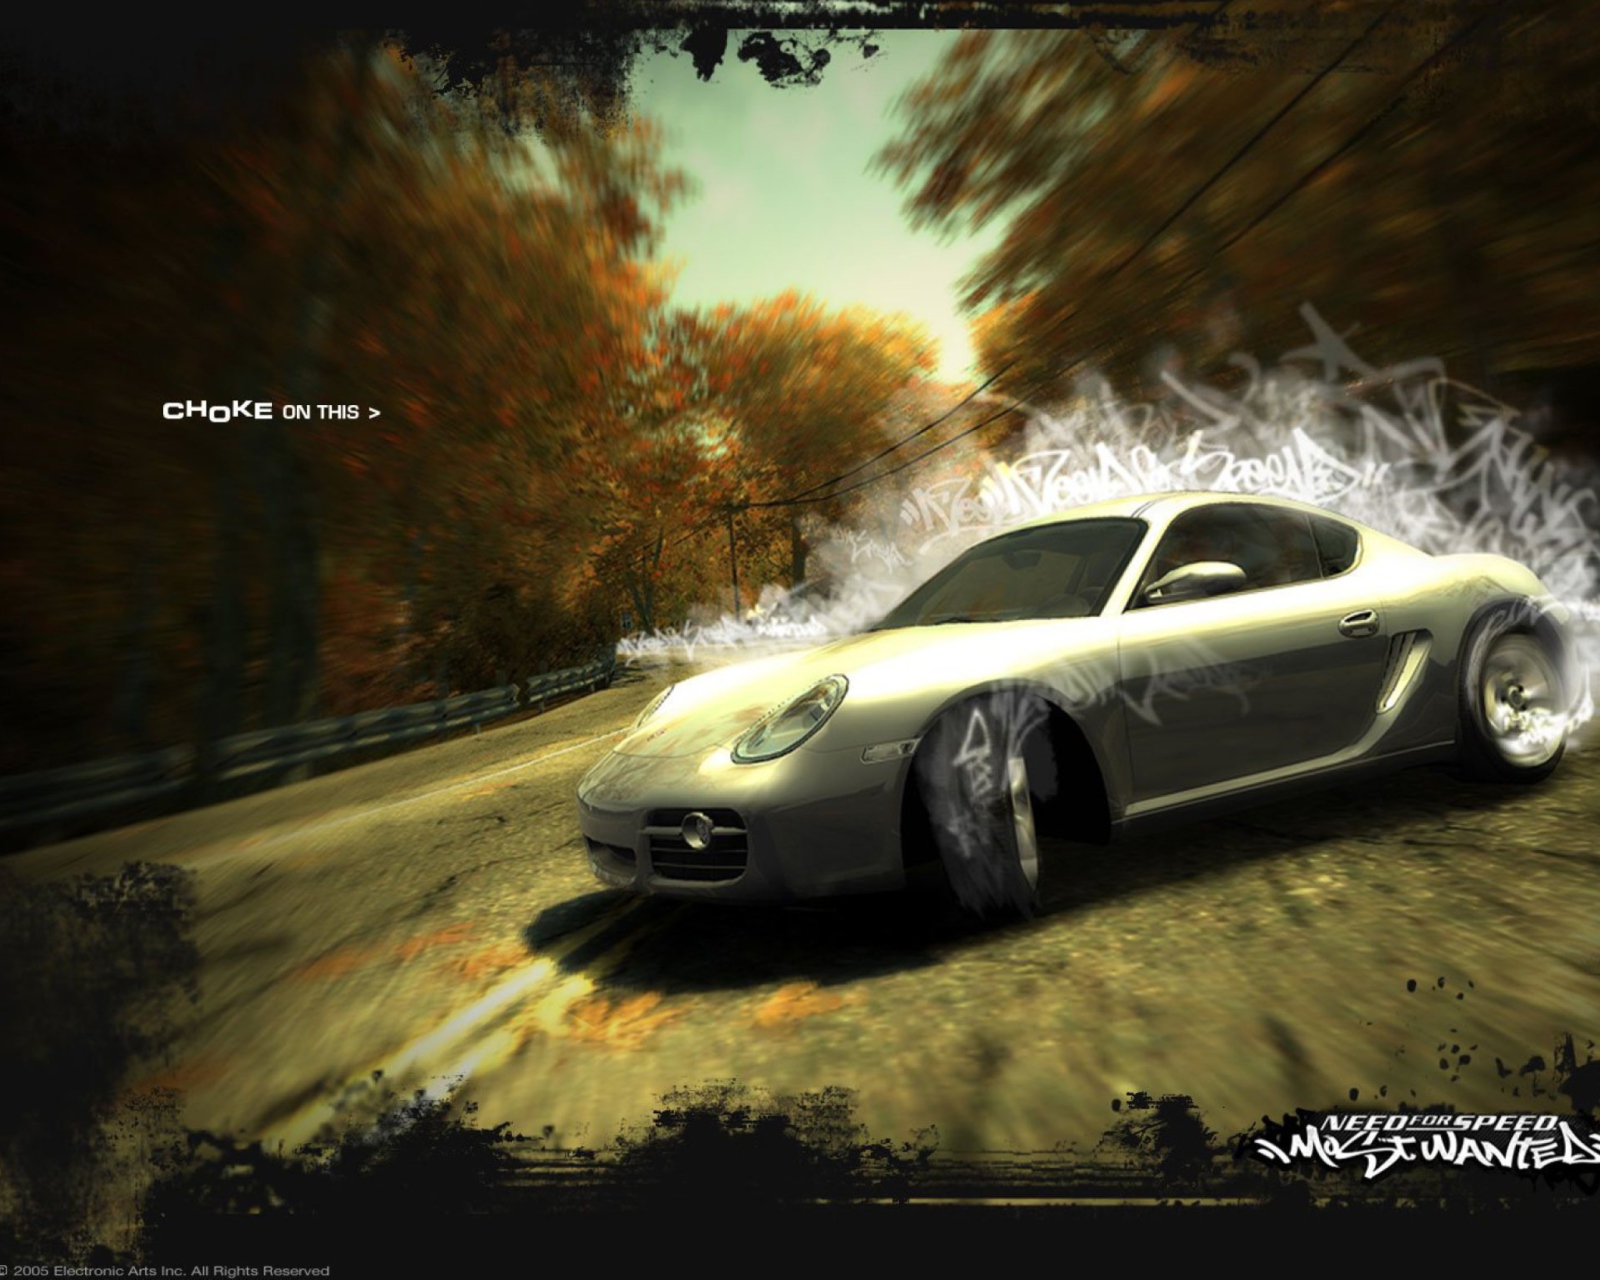 Need For Speed Most Wanted wallpaper 1600x1280